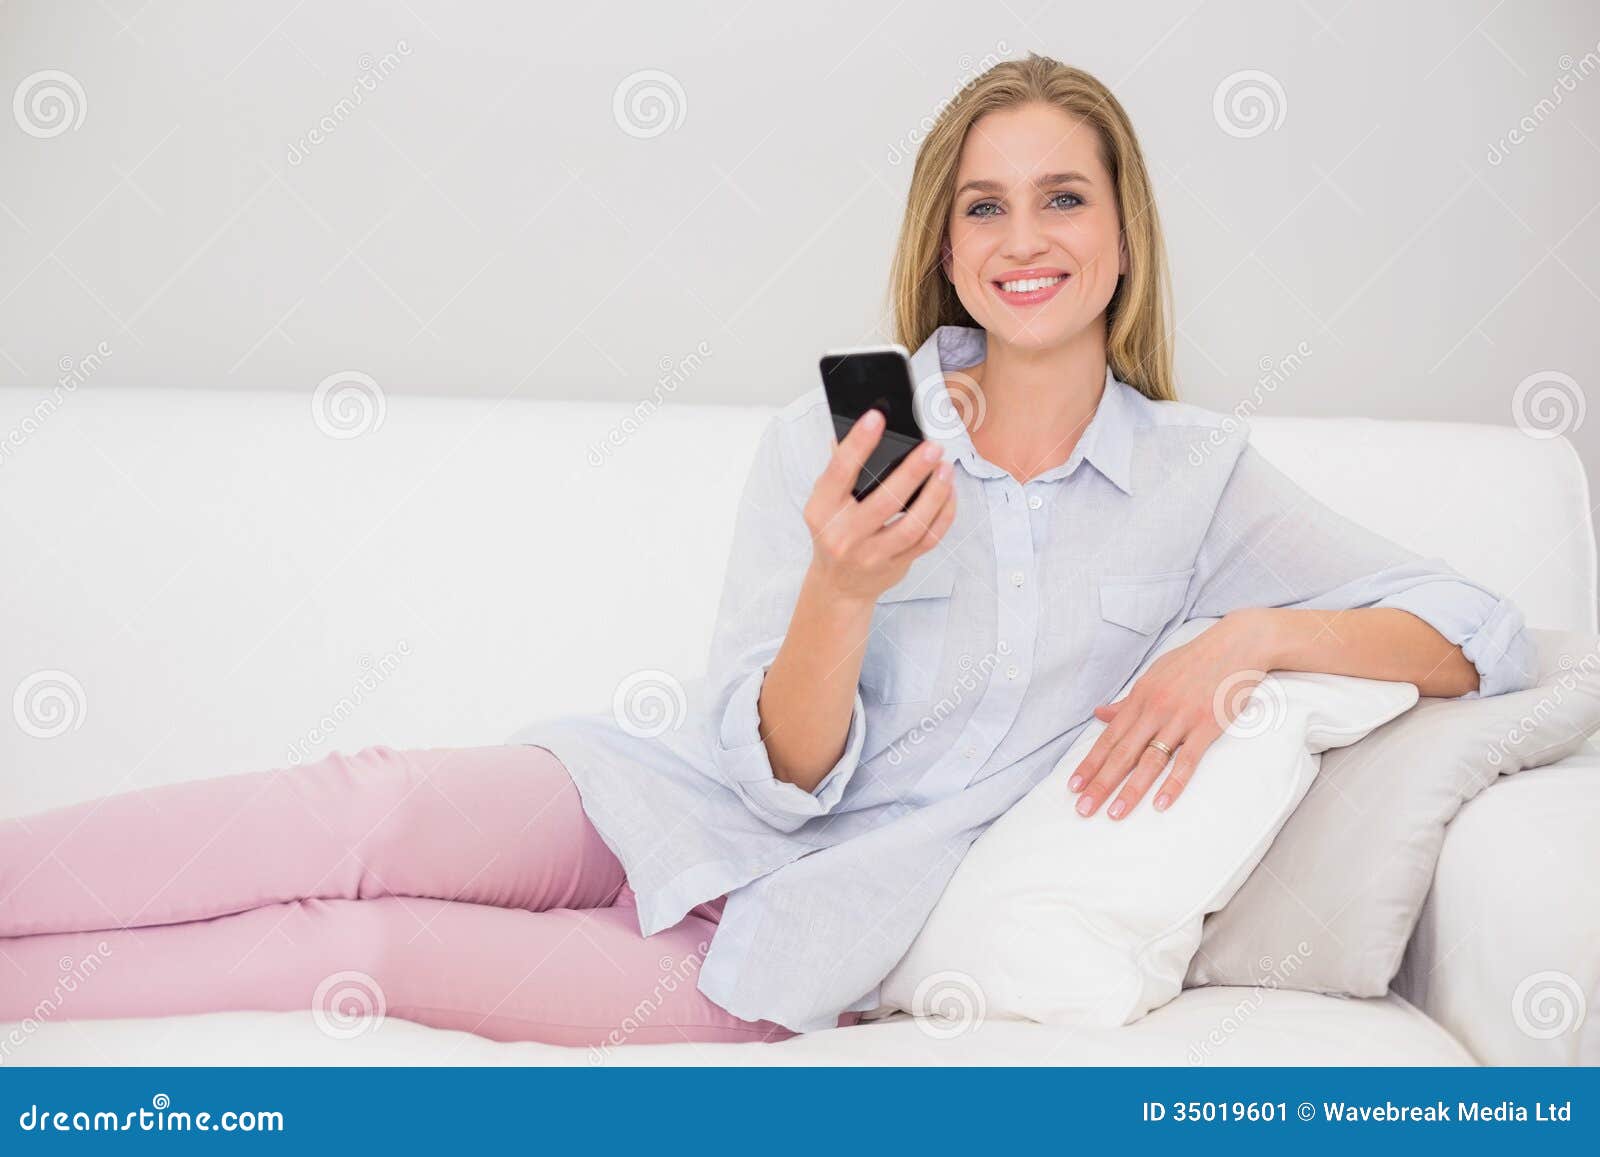 Happy Casual Blonde Relaxing on Couch Holding Smartphone Stock Image ...